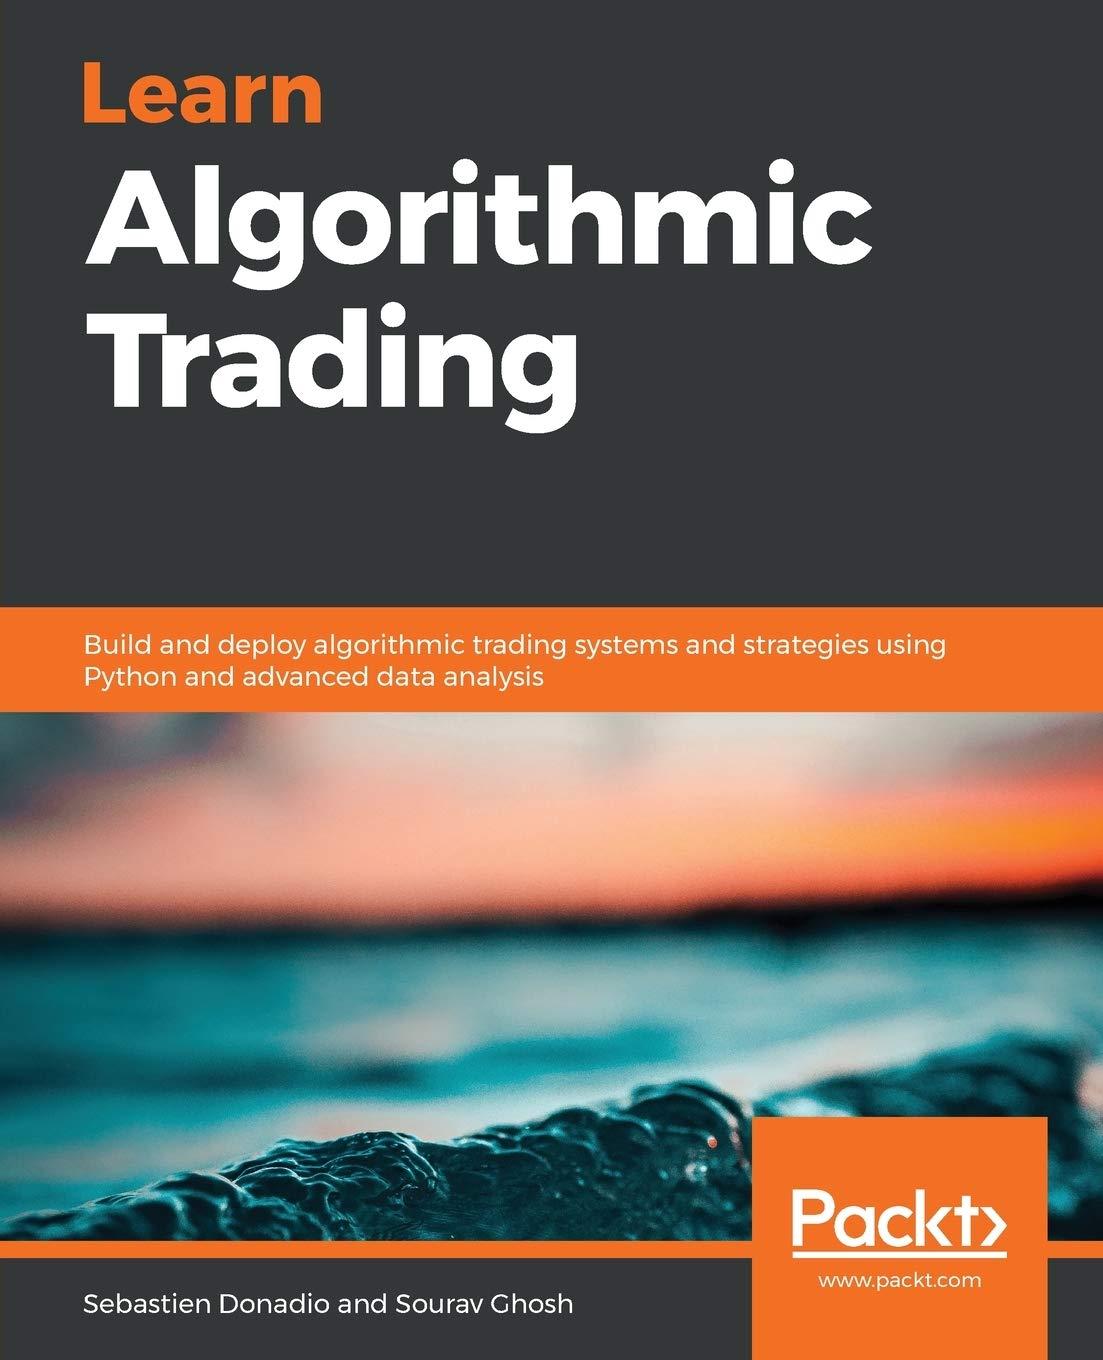 learn algorithmic trading build and deploy algorithmic trading systems and strategies using python and